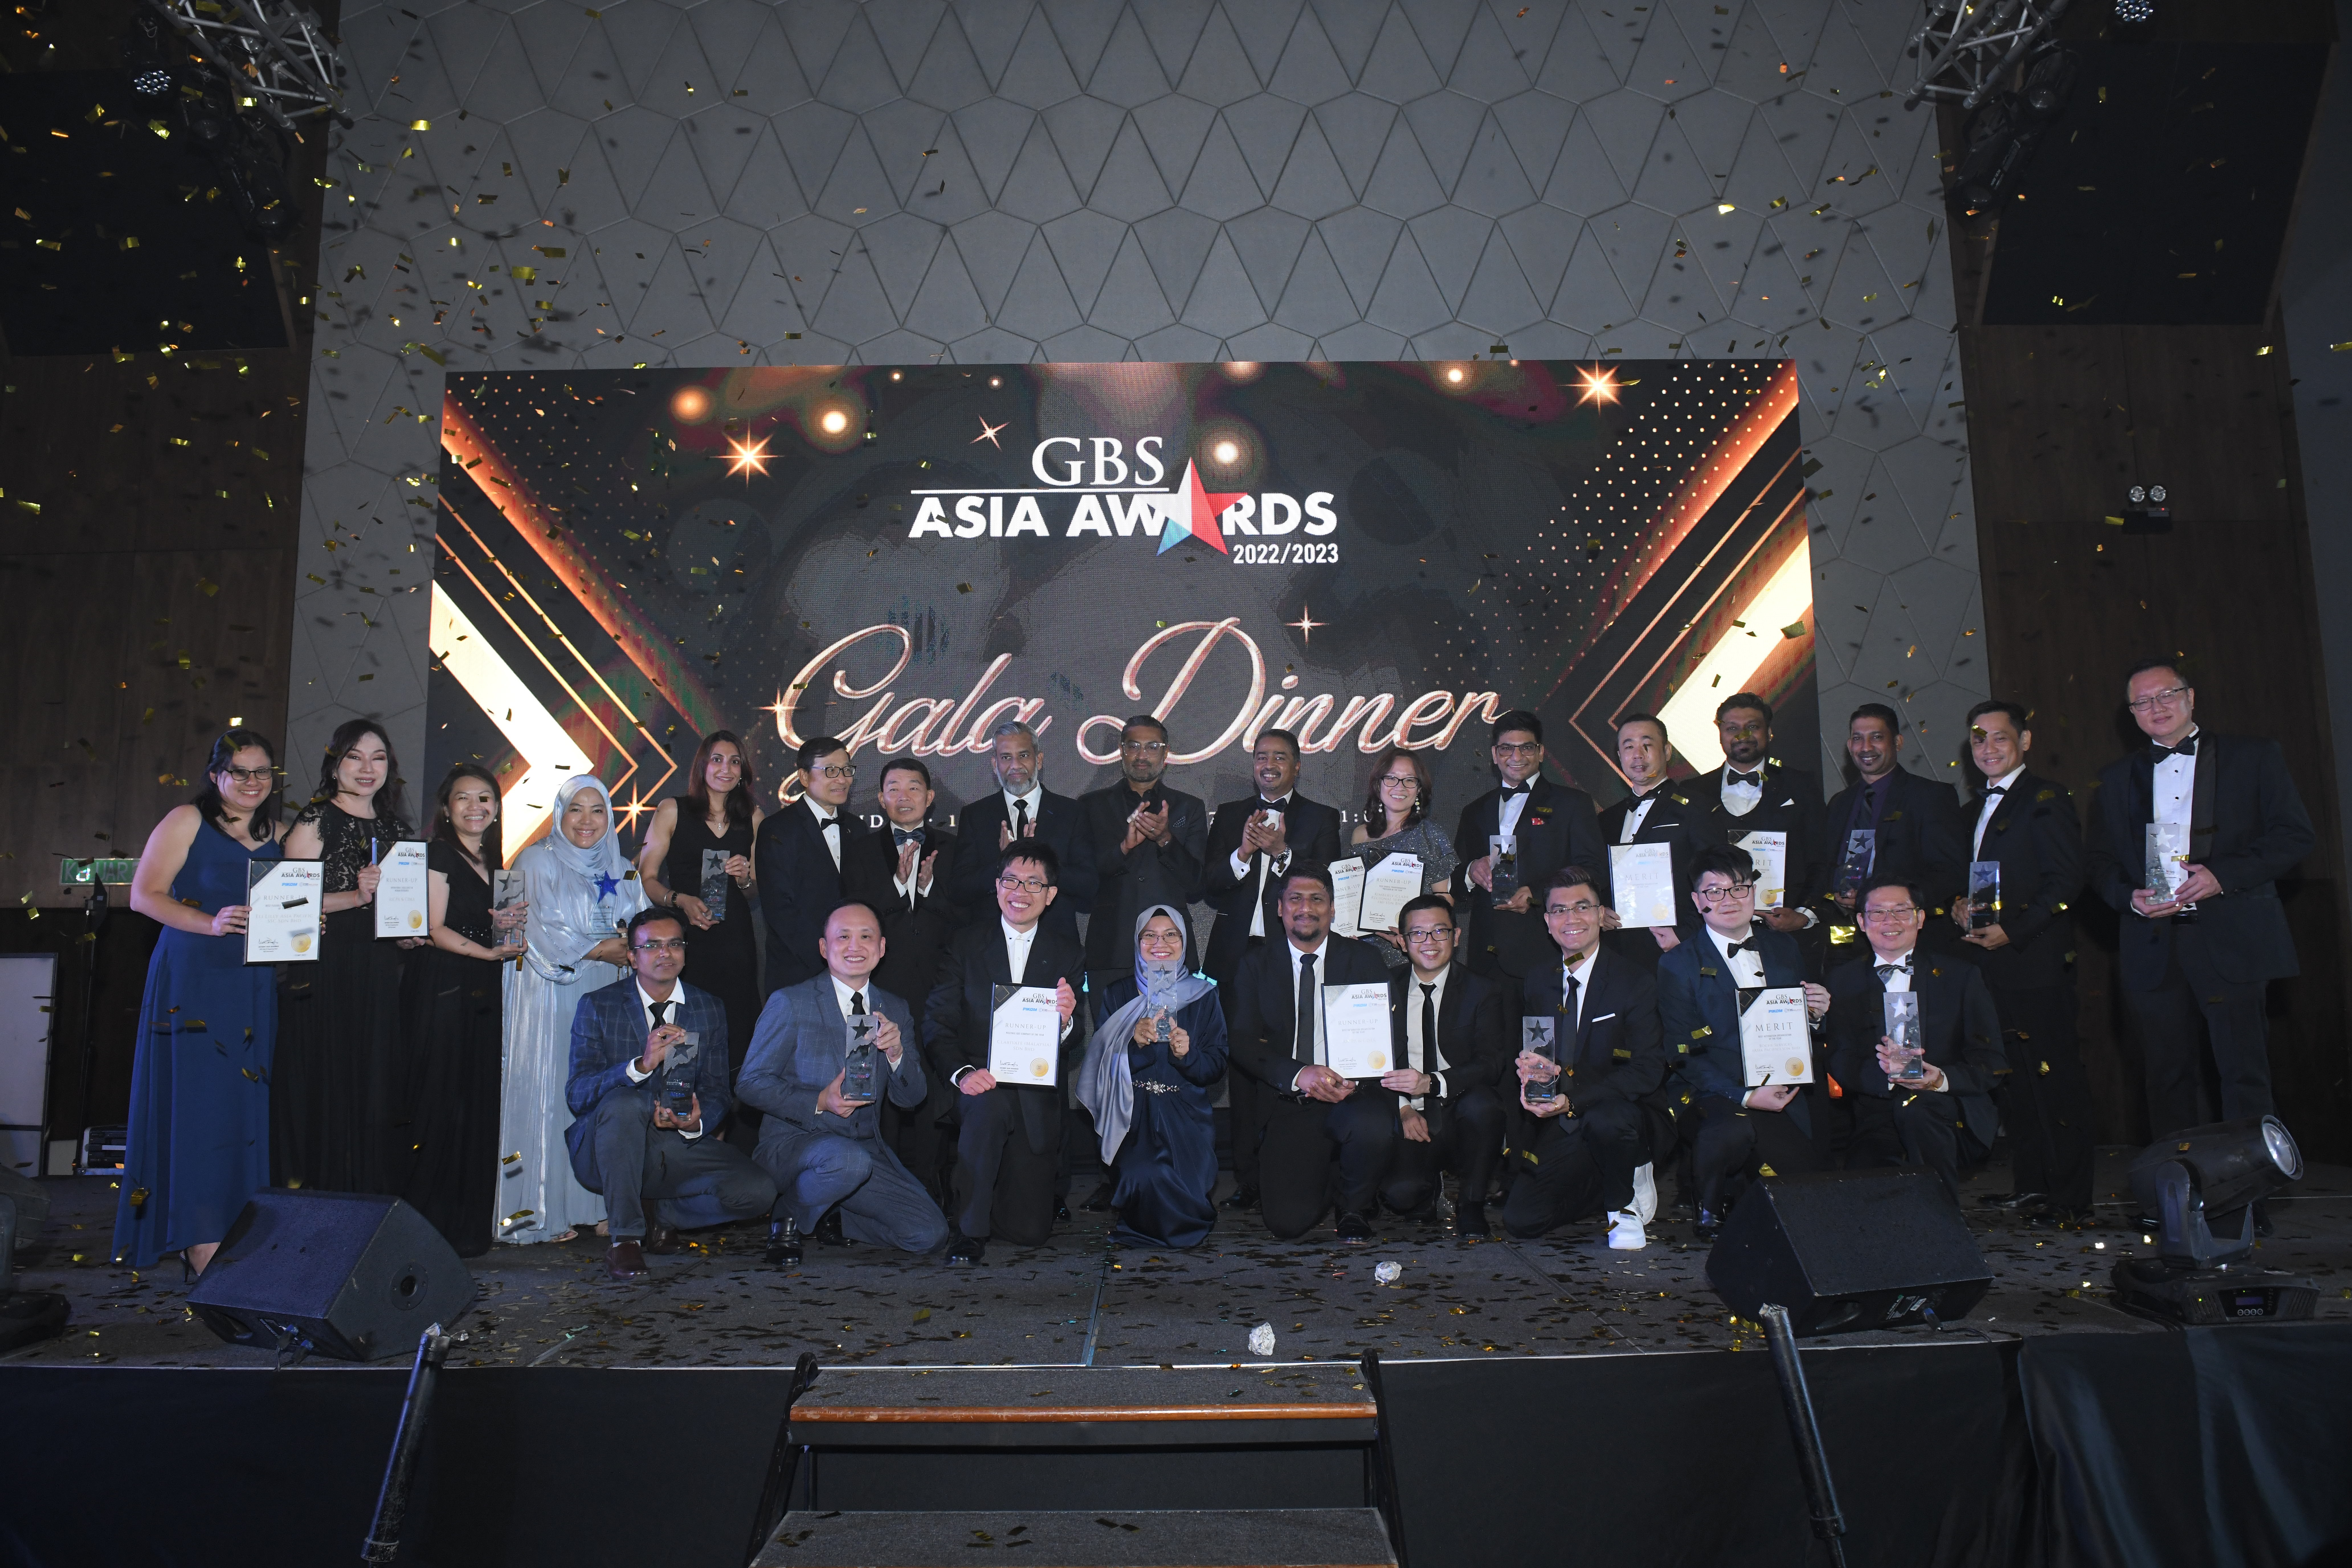 GBS Asia Awards 2023 Corporate winners with Ong Chin Seong, PIKOM Chairman (standing 7th from left), Shahul Dawood, Chief Executive HRDCorp (8th from left), Raymond Siva, Chief Digital Investment Officer, MDEC (9th from left), Anthony Raja Devadoss, Chair of GBS Malaysia Chapter, (10th from left).